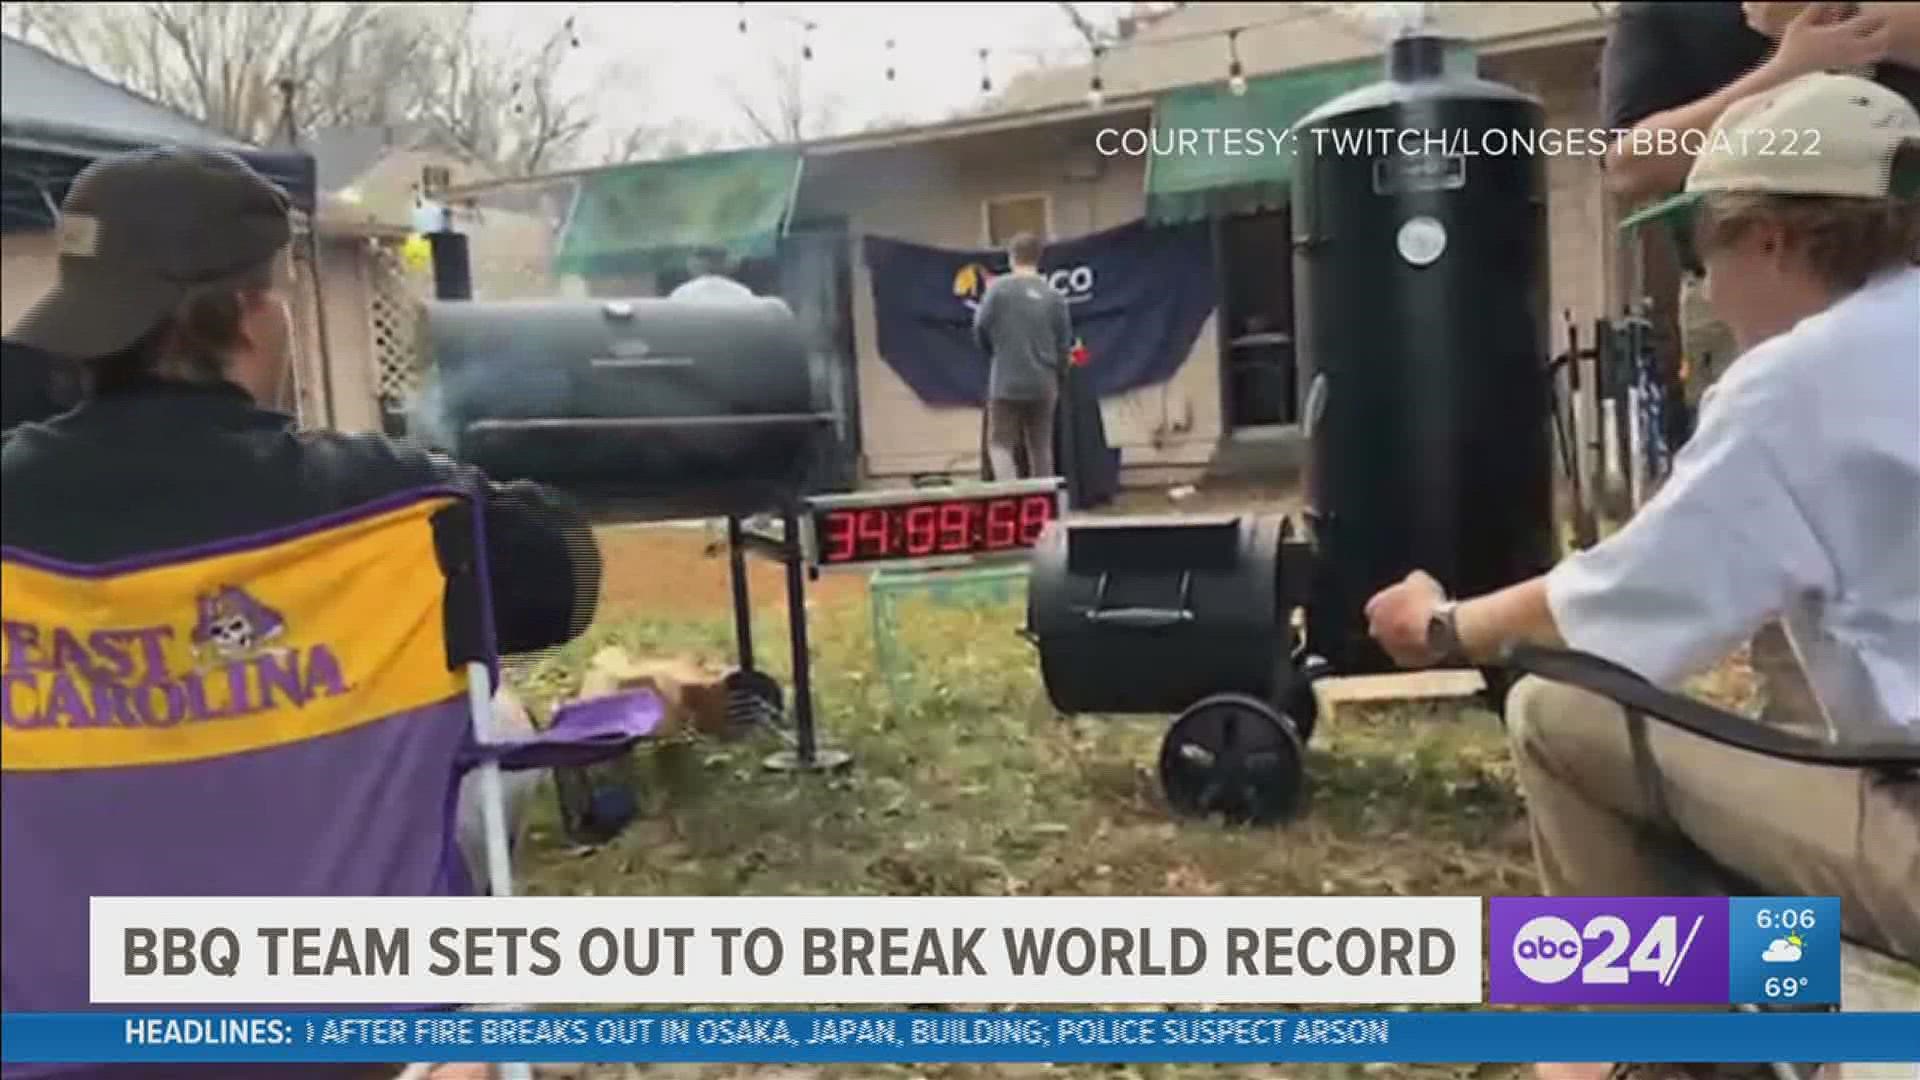 A group of five friends will attempt to break the team record for the longest barbecue marathon.